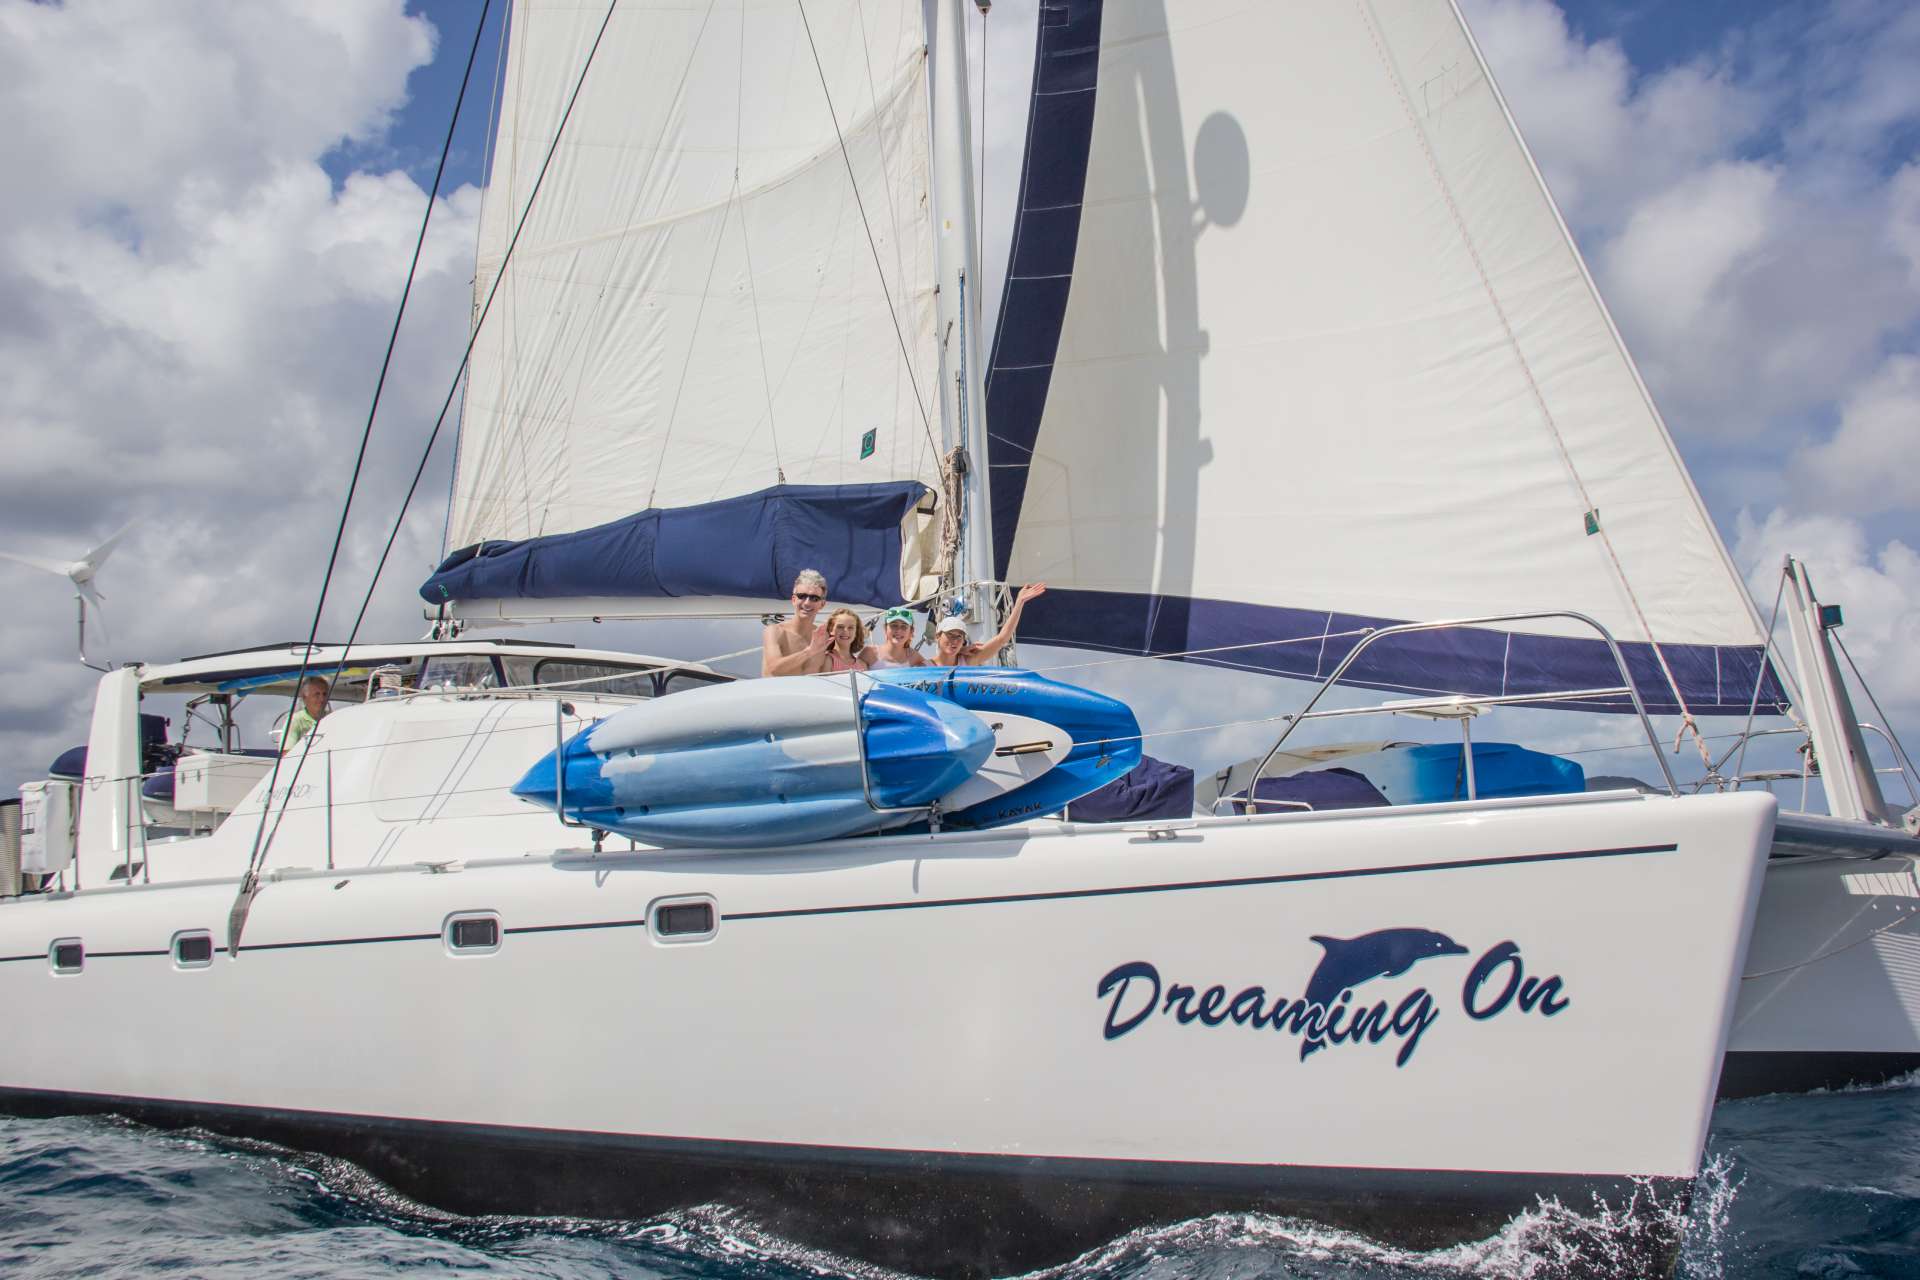 dreaming on - Yacht Charter Calliaqua & Boat hire in Central america, Belize 2